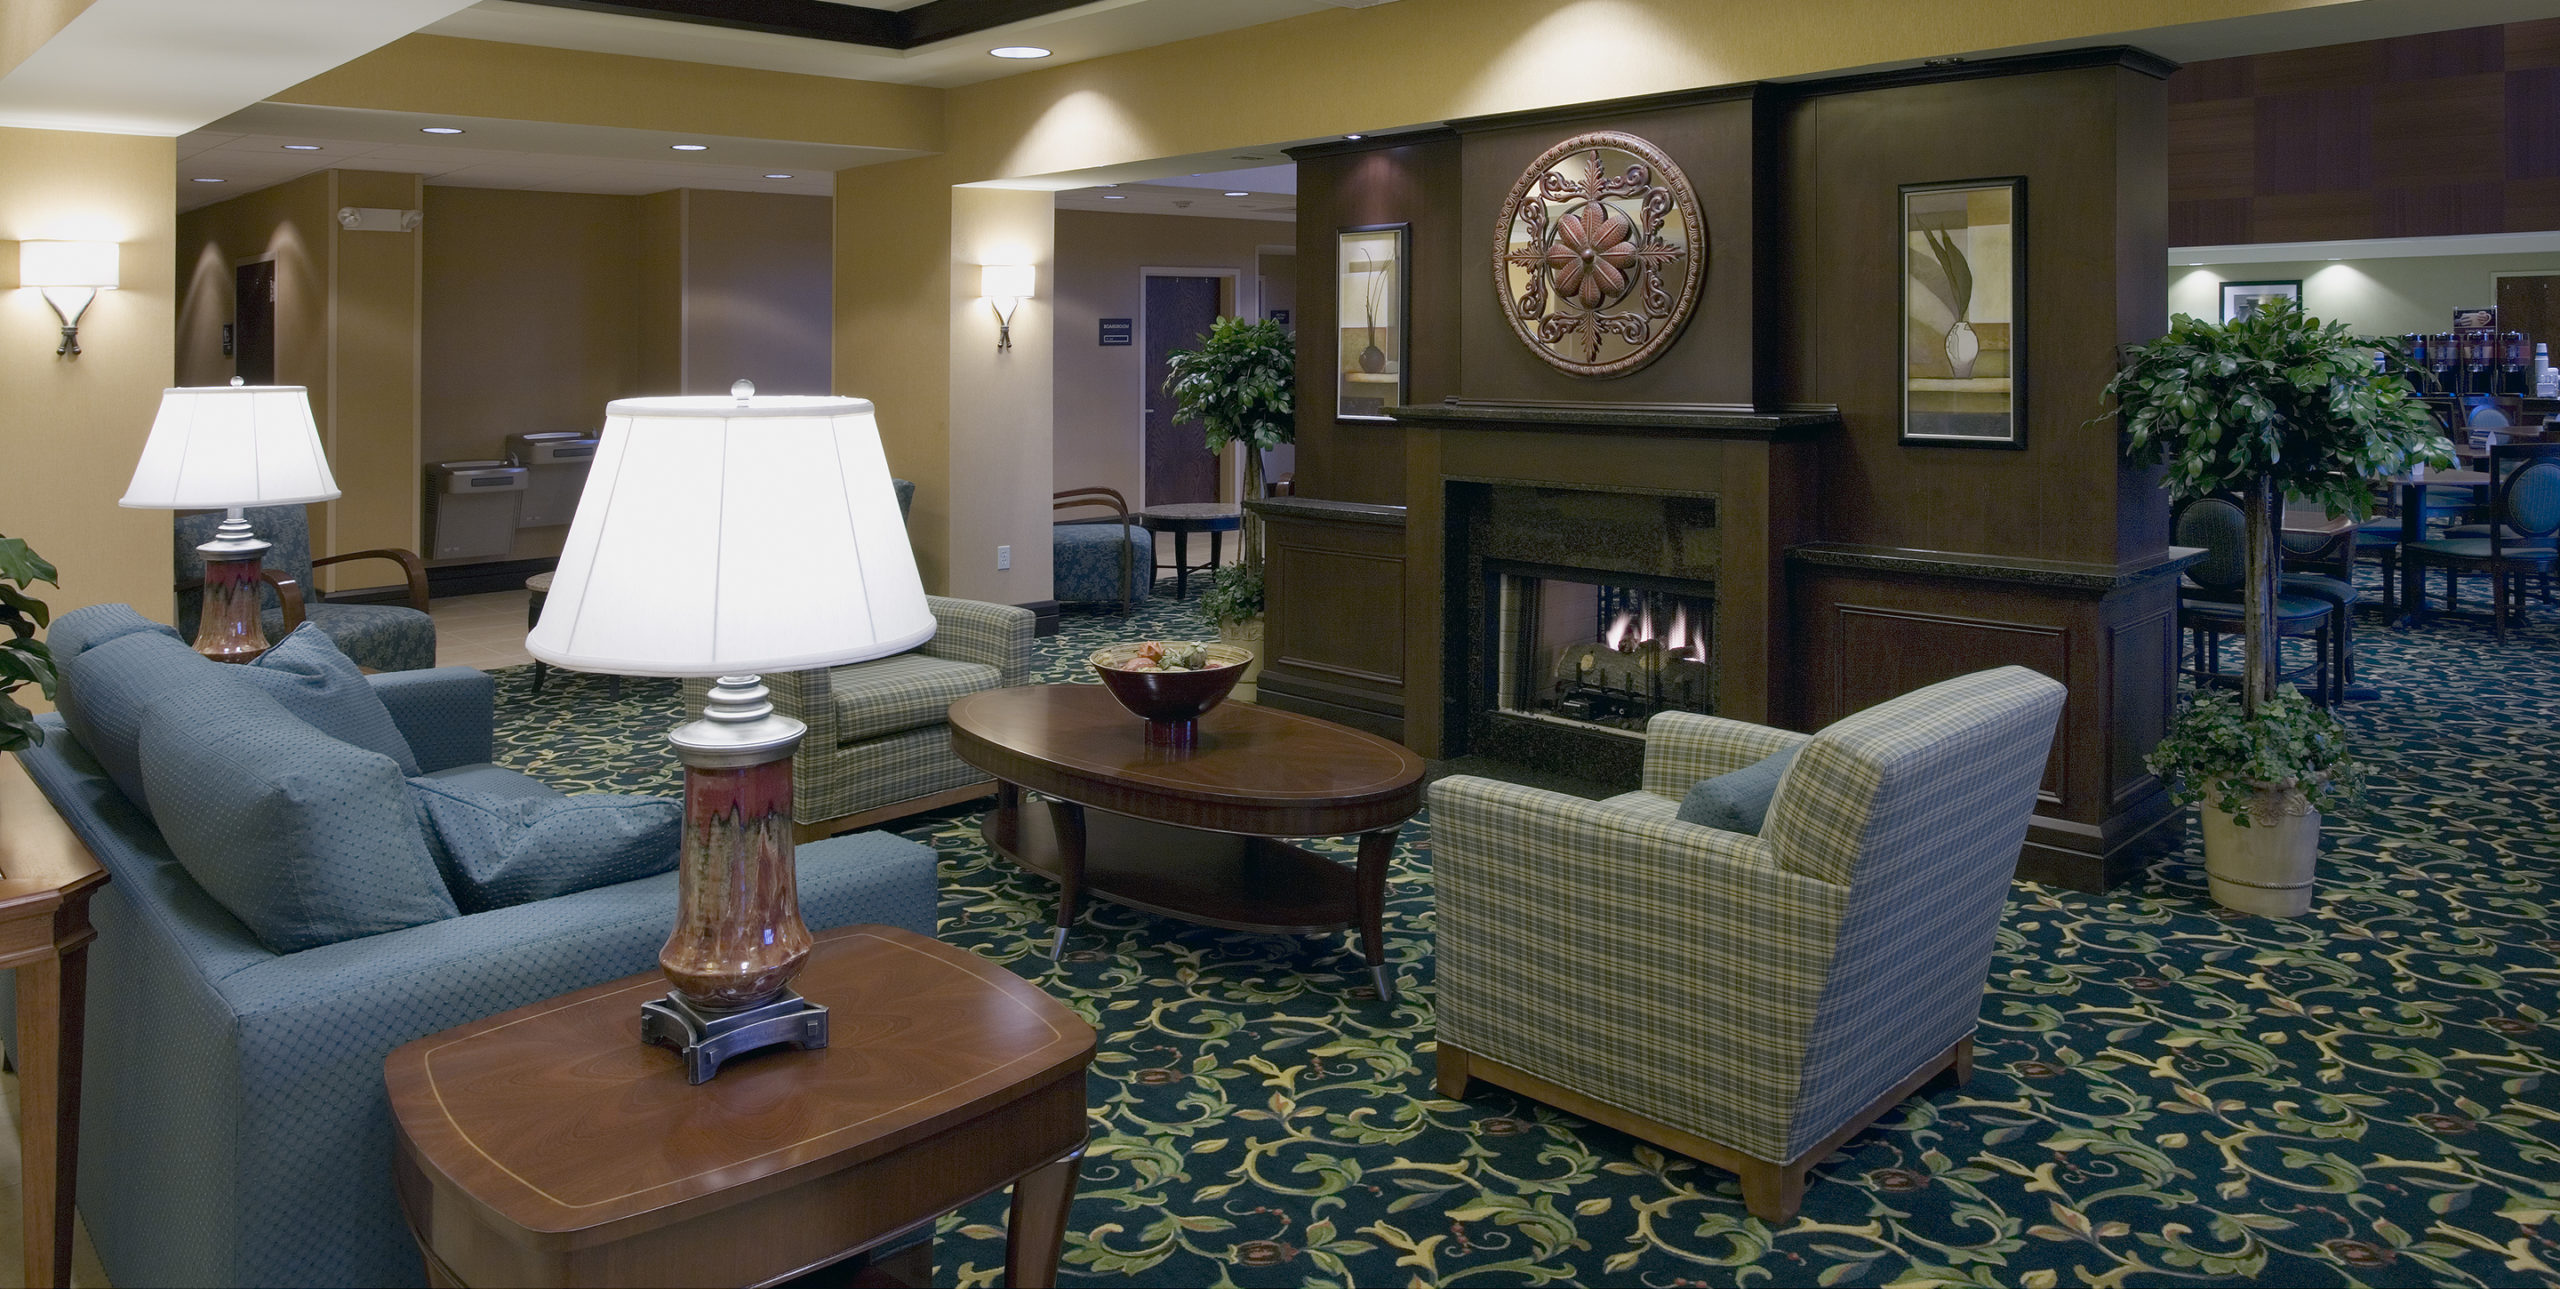 Common seating in front of a fireplace at Hampton Inn at 1 North Avenue, Garden City, NY